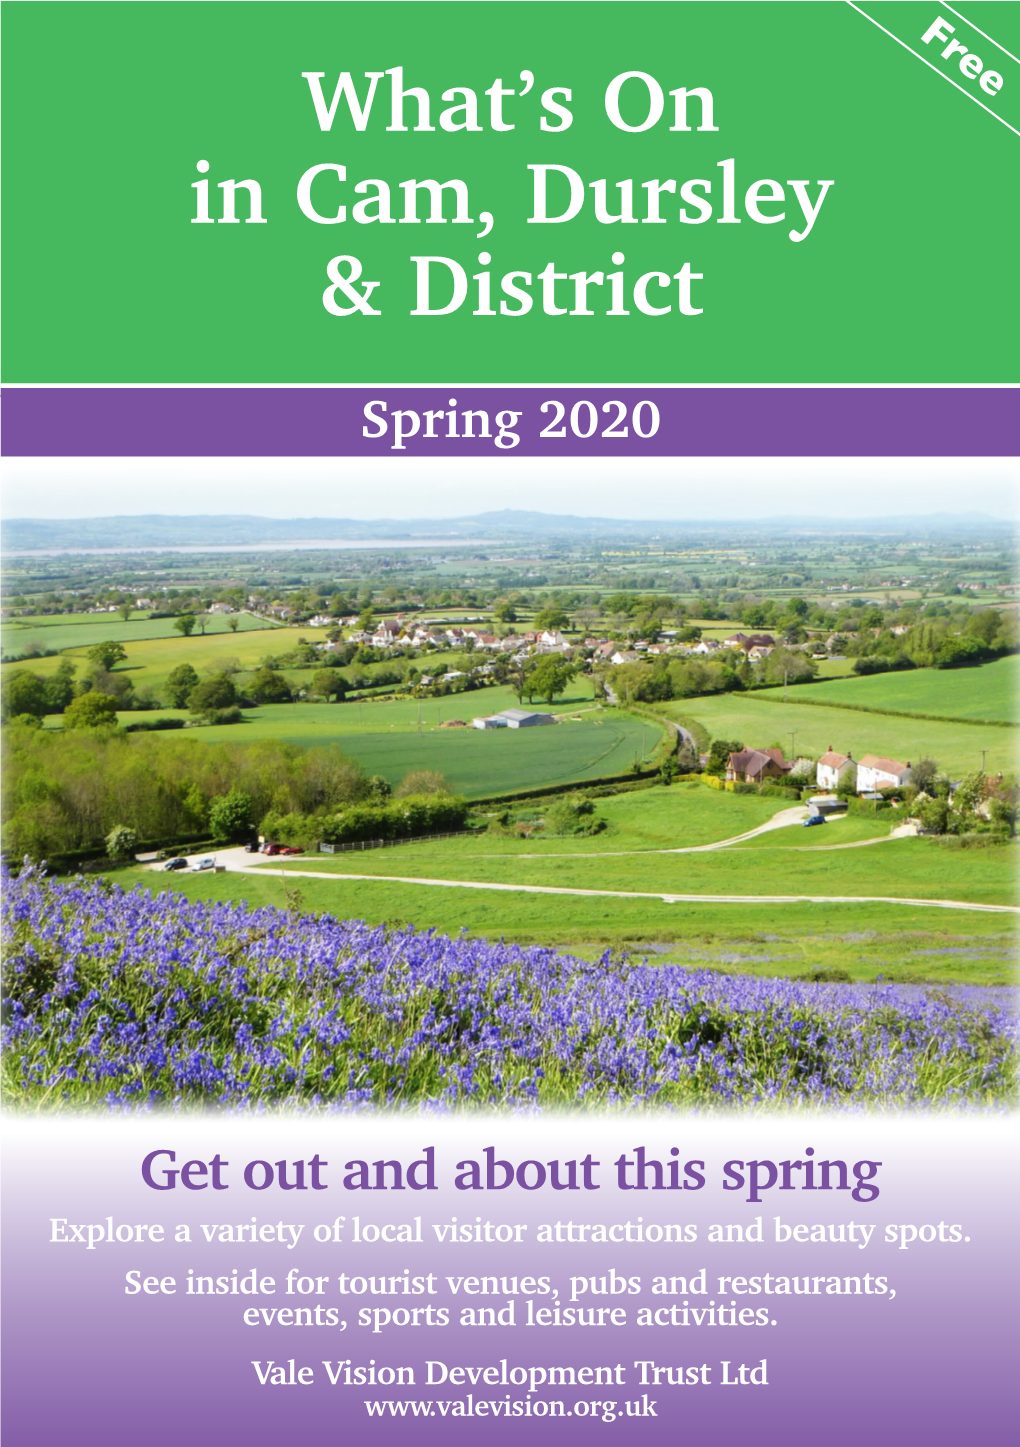 What's on in Cam, Dursley & District